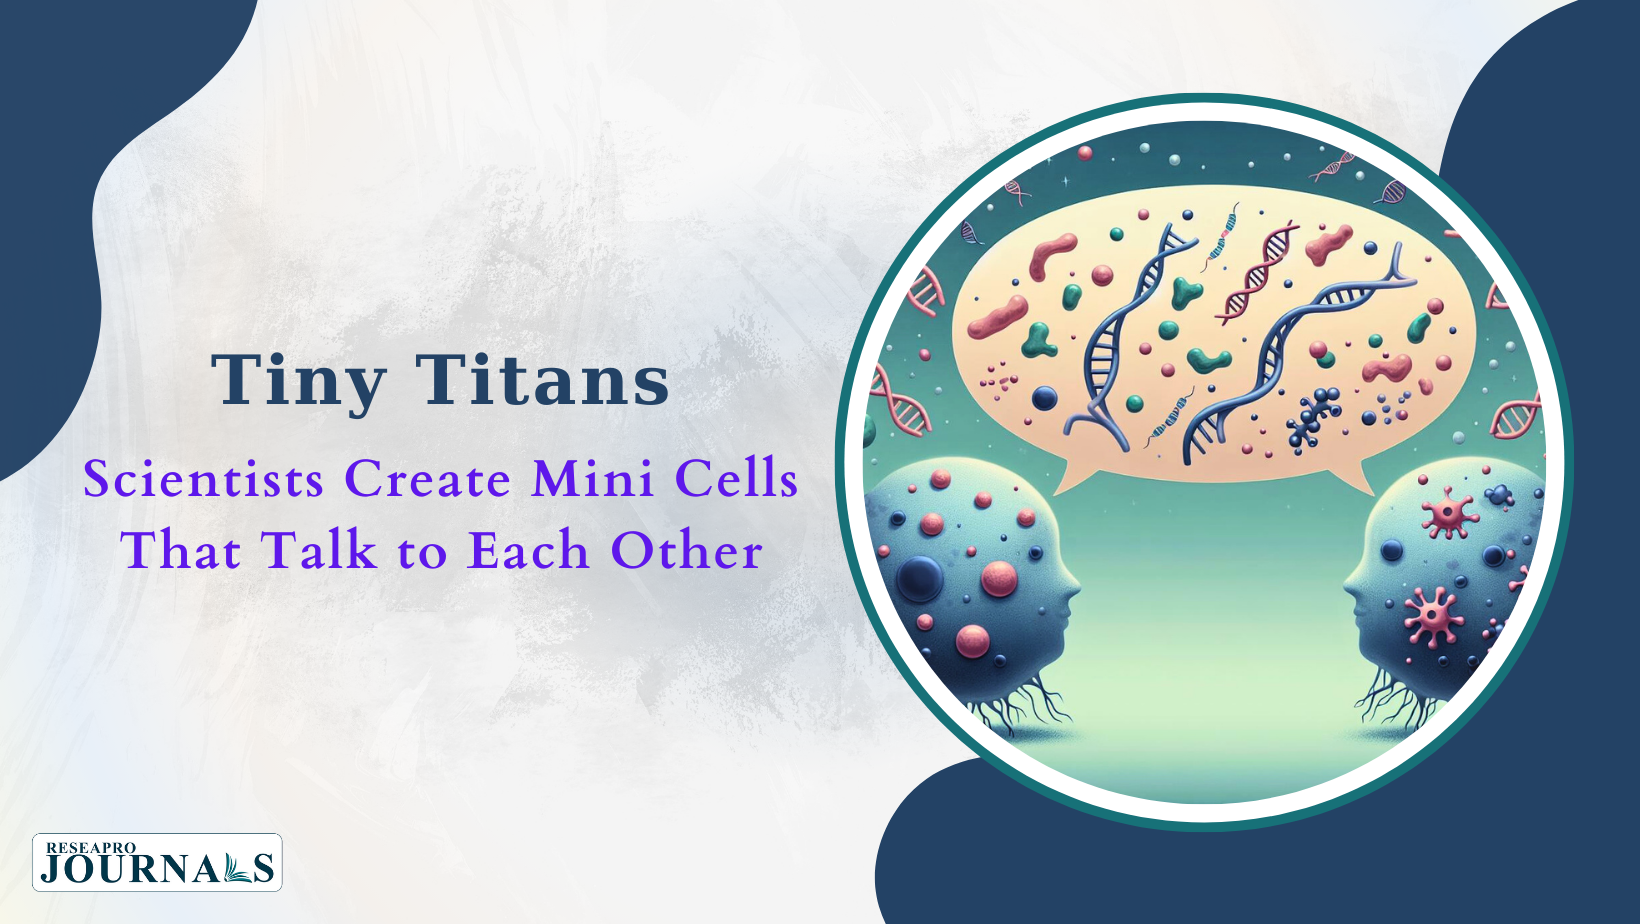 Tiny Titans: Scientists Create Mini Cells That Talk to Each Other